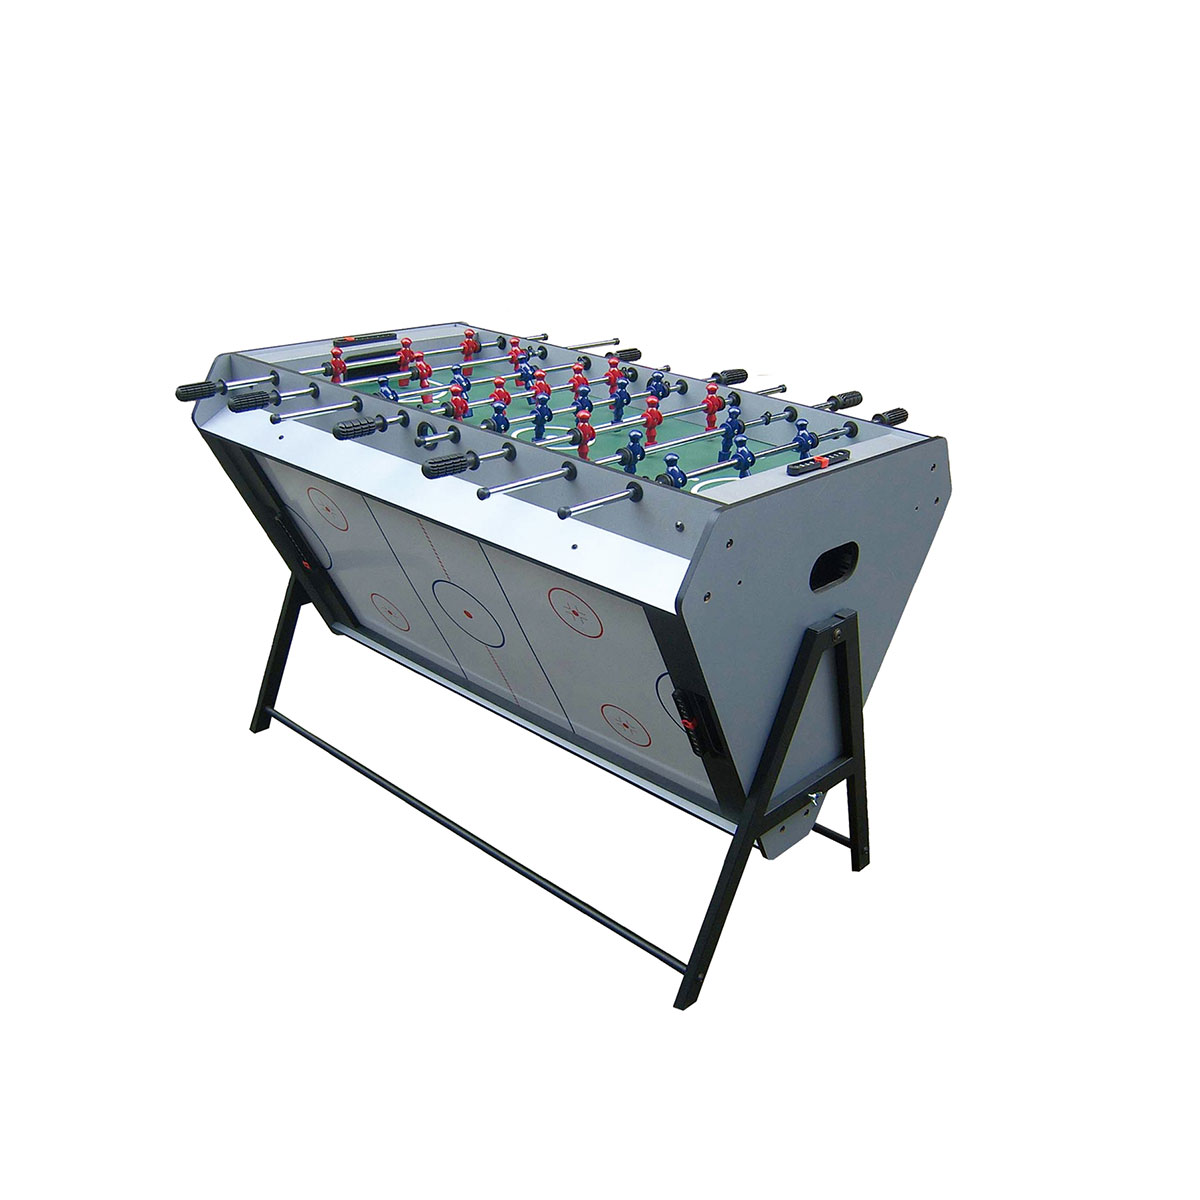 3 in 1 game table pool table tennis game air hockey family table multi game|WIN.MAX Featured Image